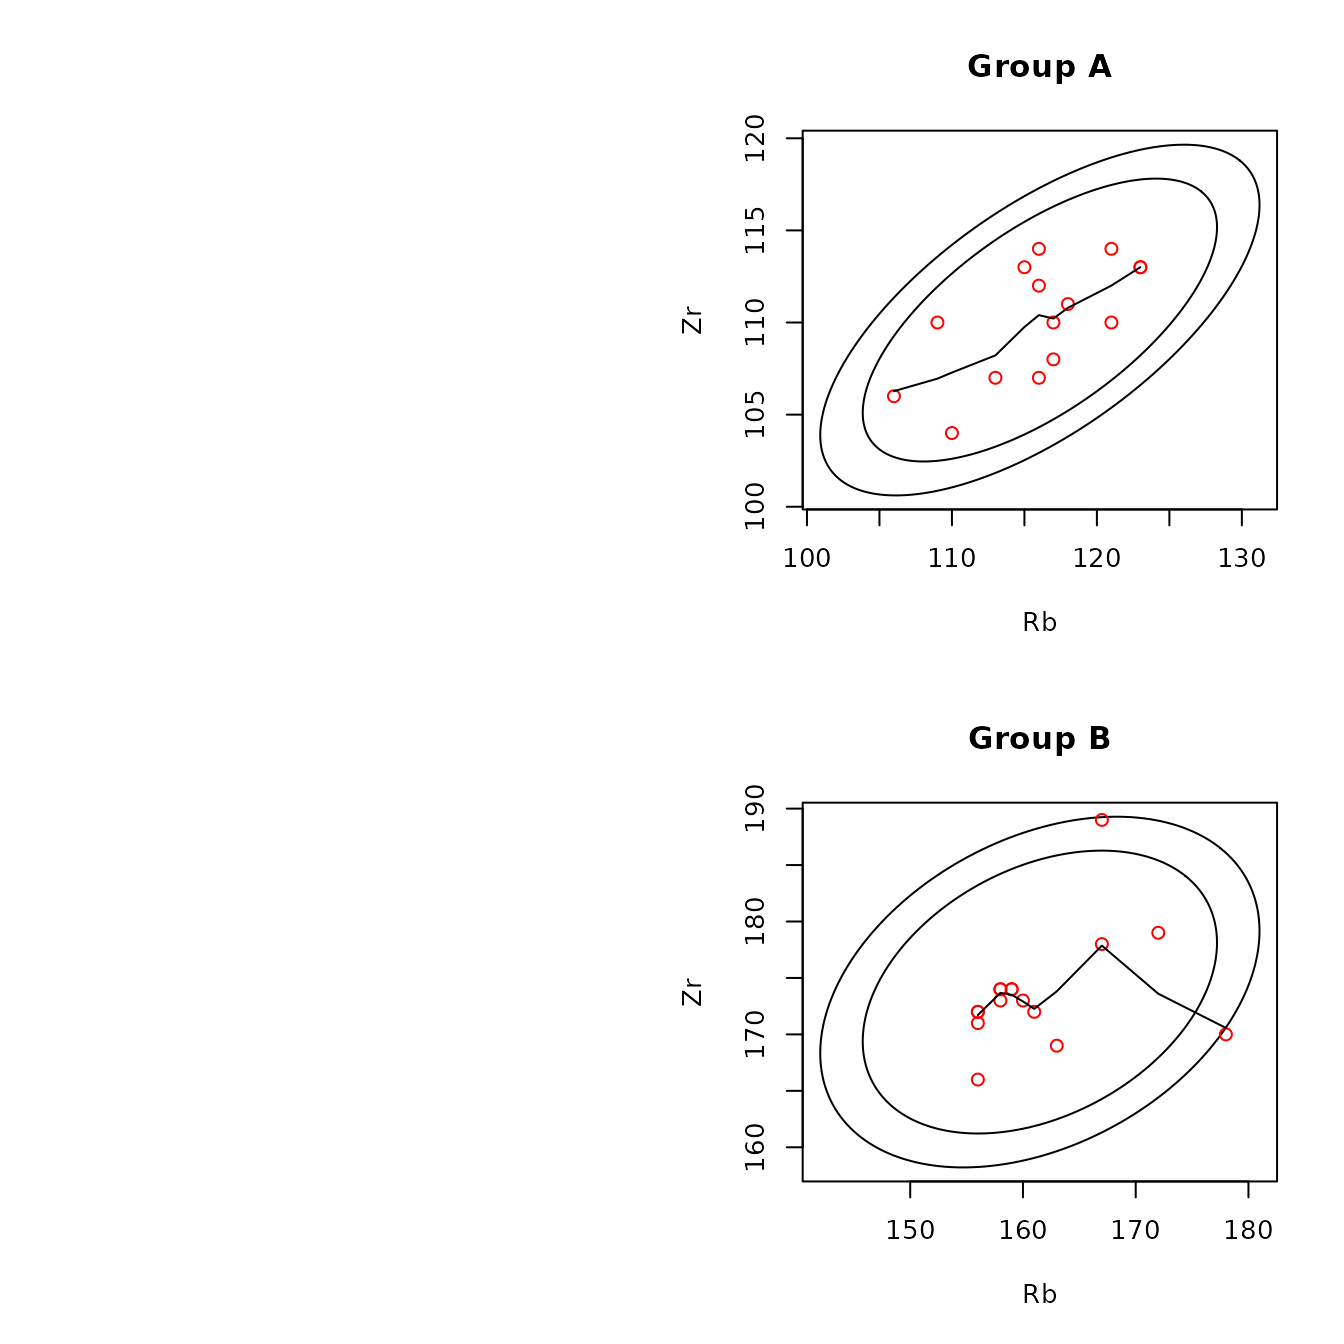 Figure 4.5: Example of scatterplots for the obsidian Jemez source data with confidence ellipses and robust lowess smoothing lines.